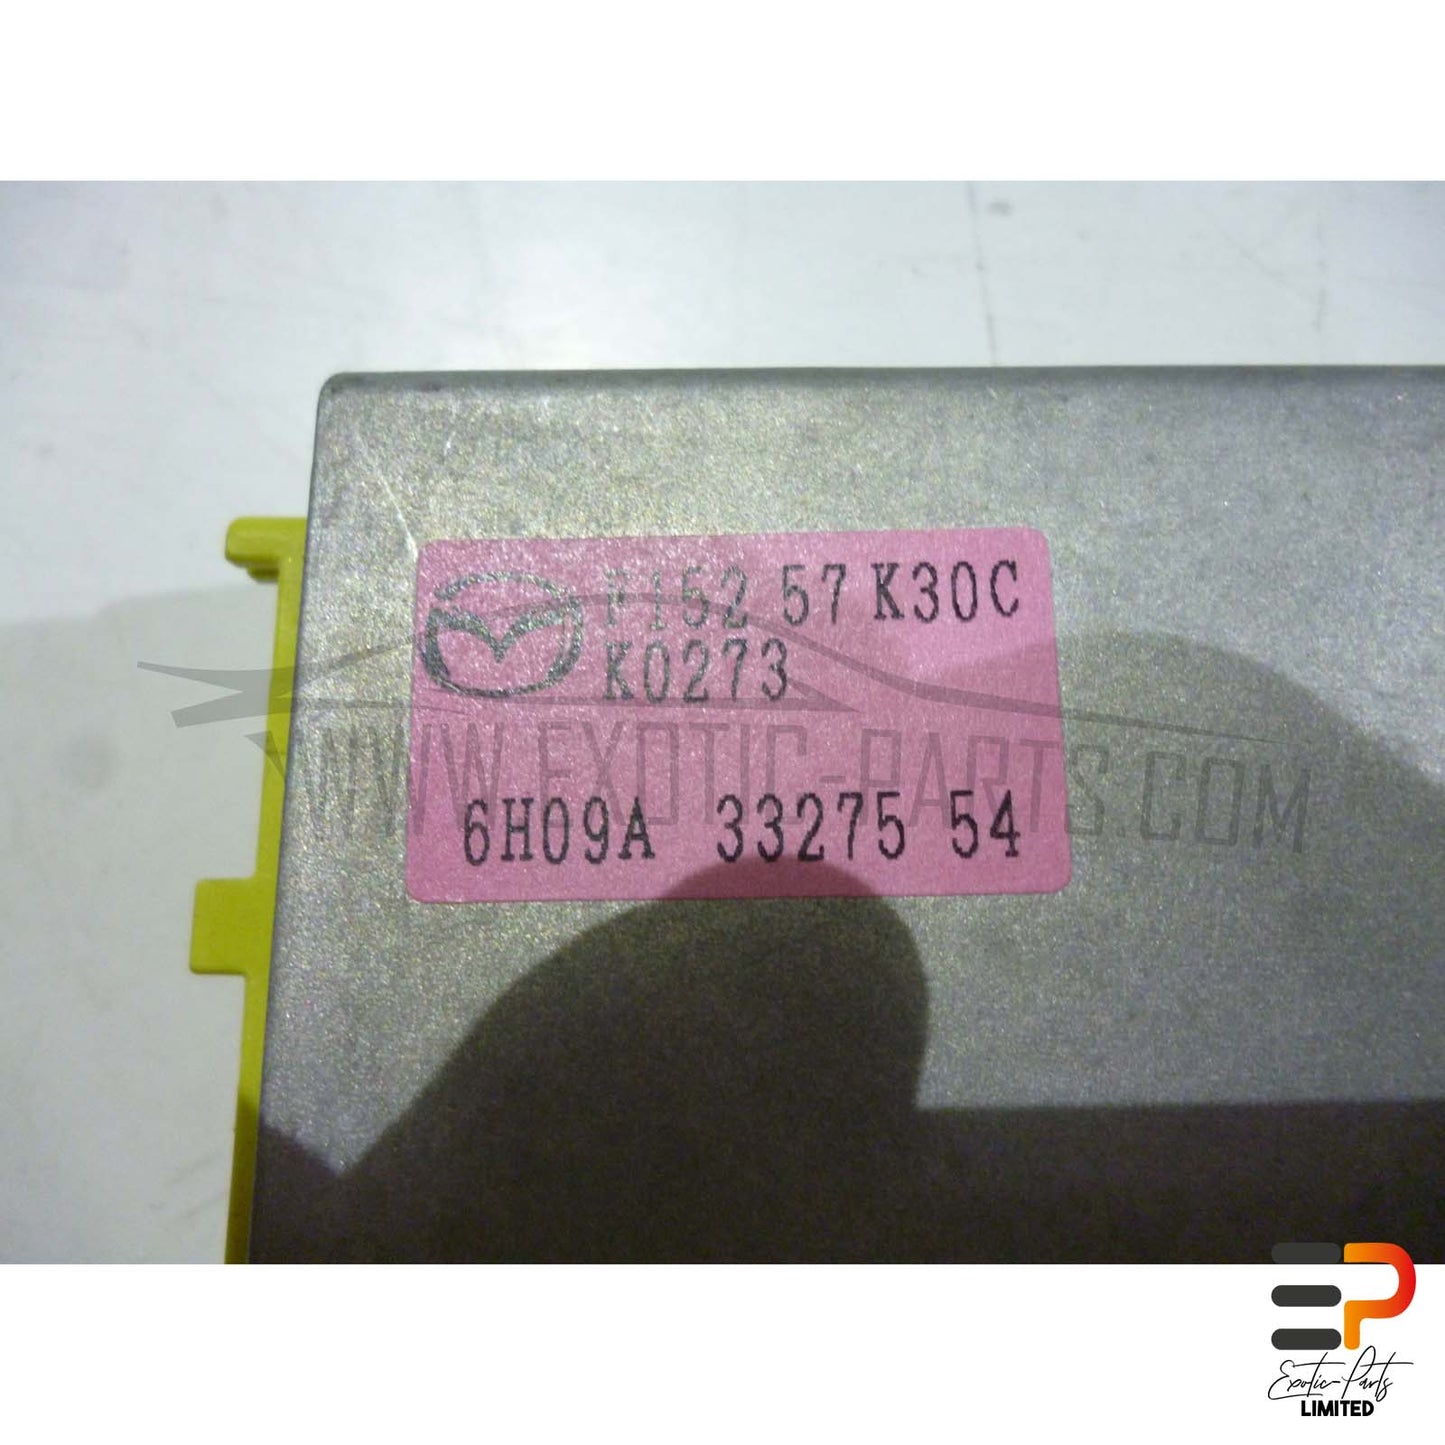 Mazda RX-8 SE 170 KW Airbag Electronic Control Module F152-57-K30C picture 2